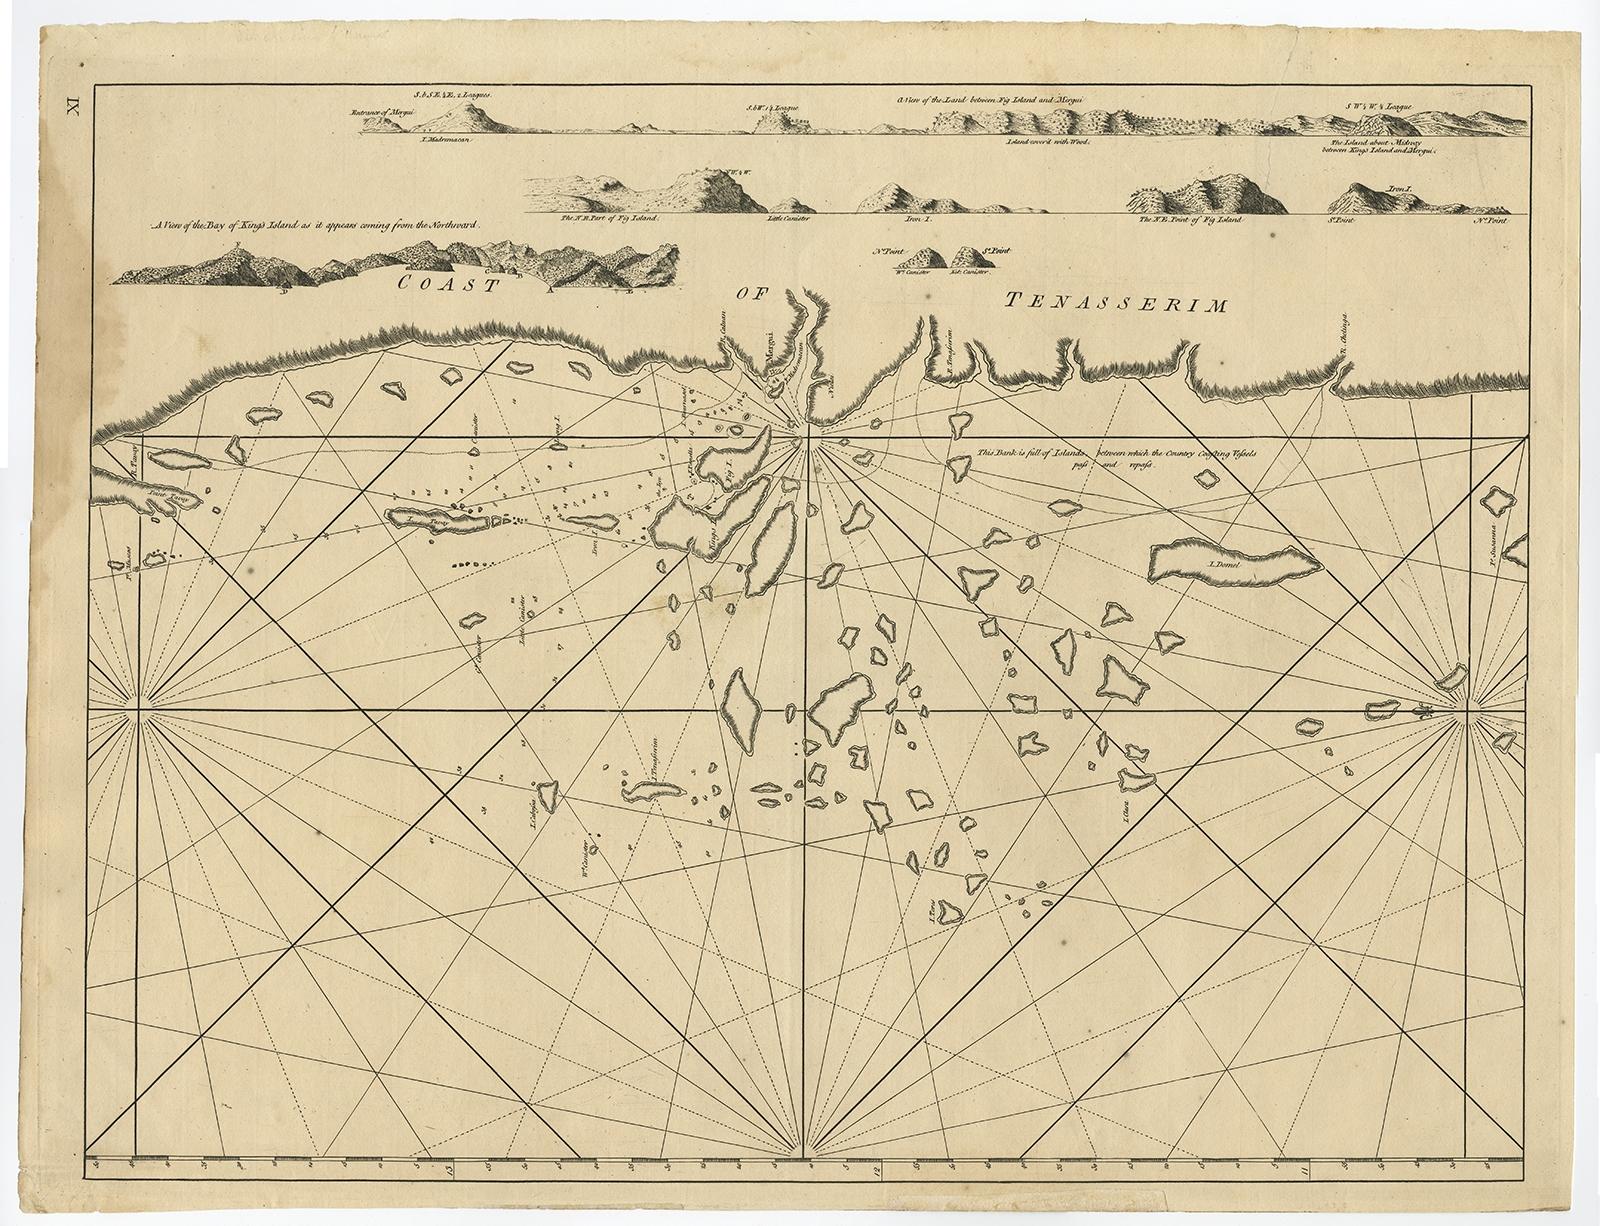 Antique map titled 'Coast of Tenasserim.' 

Sea chart of the Tenasserim area, Myanmar in South East Asia. Source unknown, to be determined.

Artists and Engravers: Anonymous.